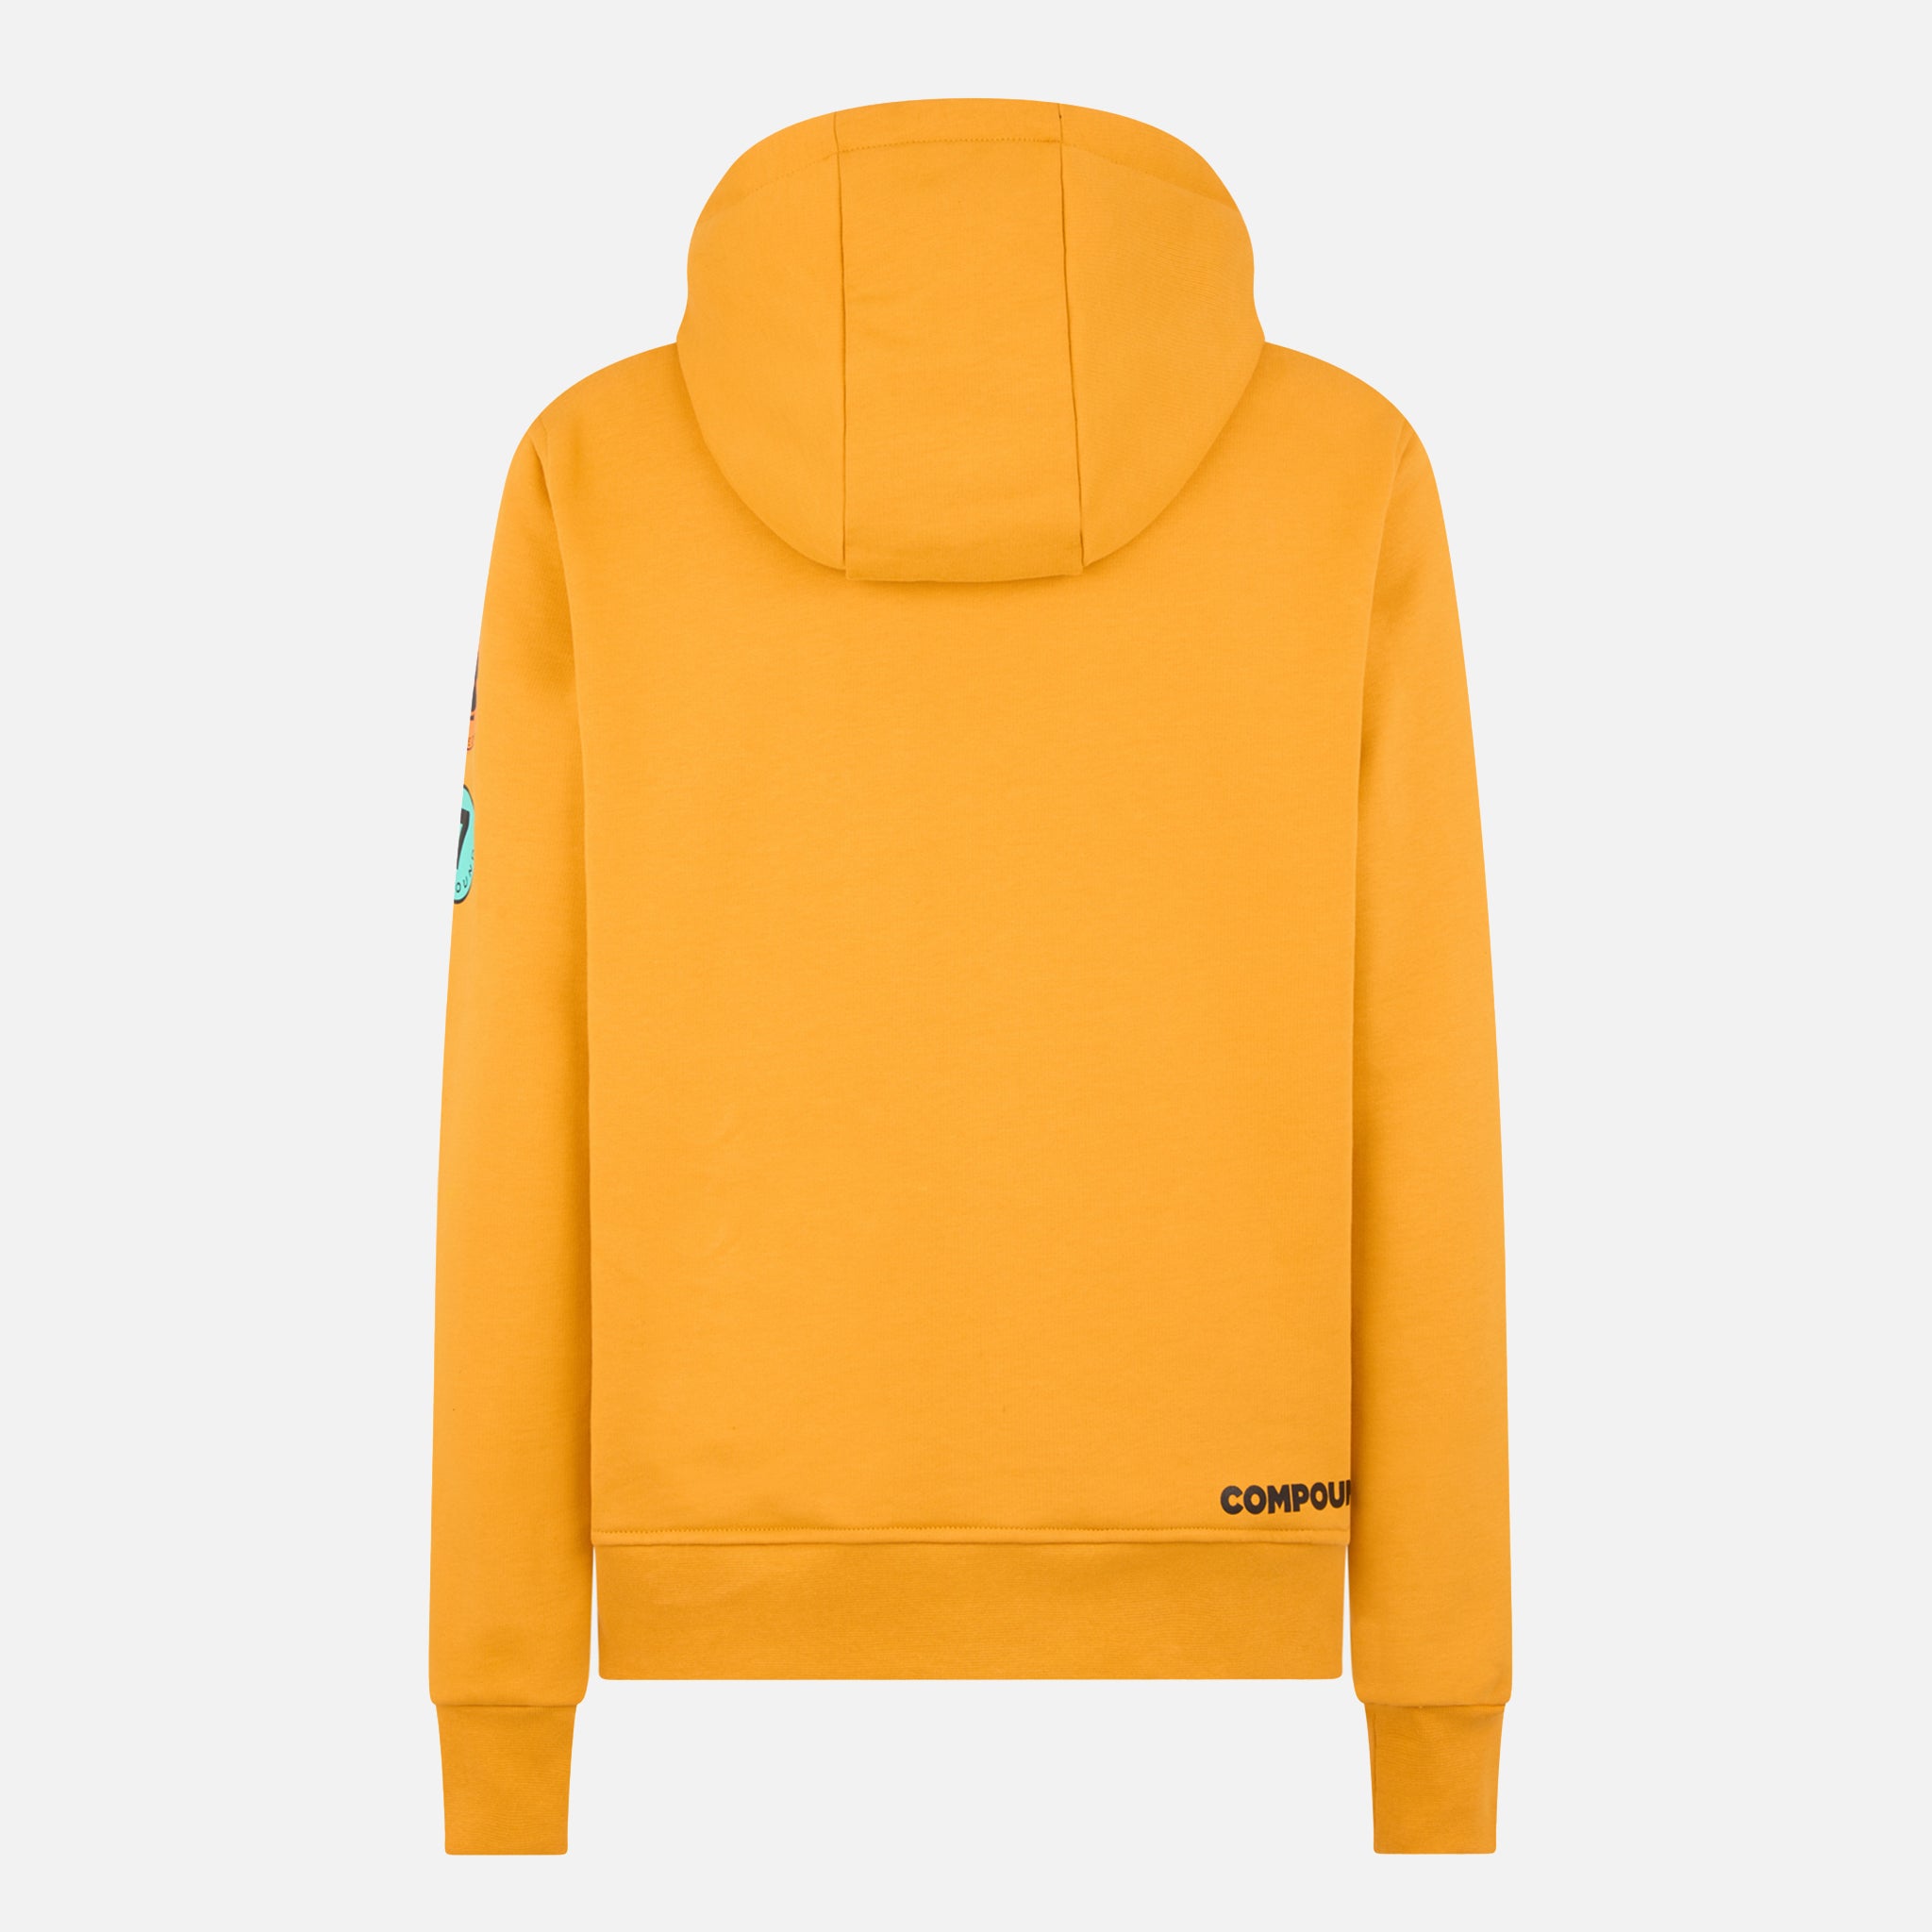 COMPOUND X SAVE THE DUCK "7" HOODIE - YELLOW / BLACK